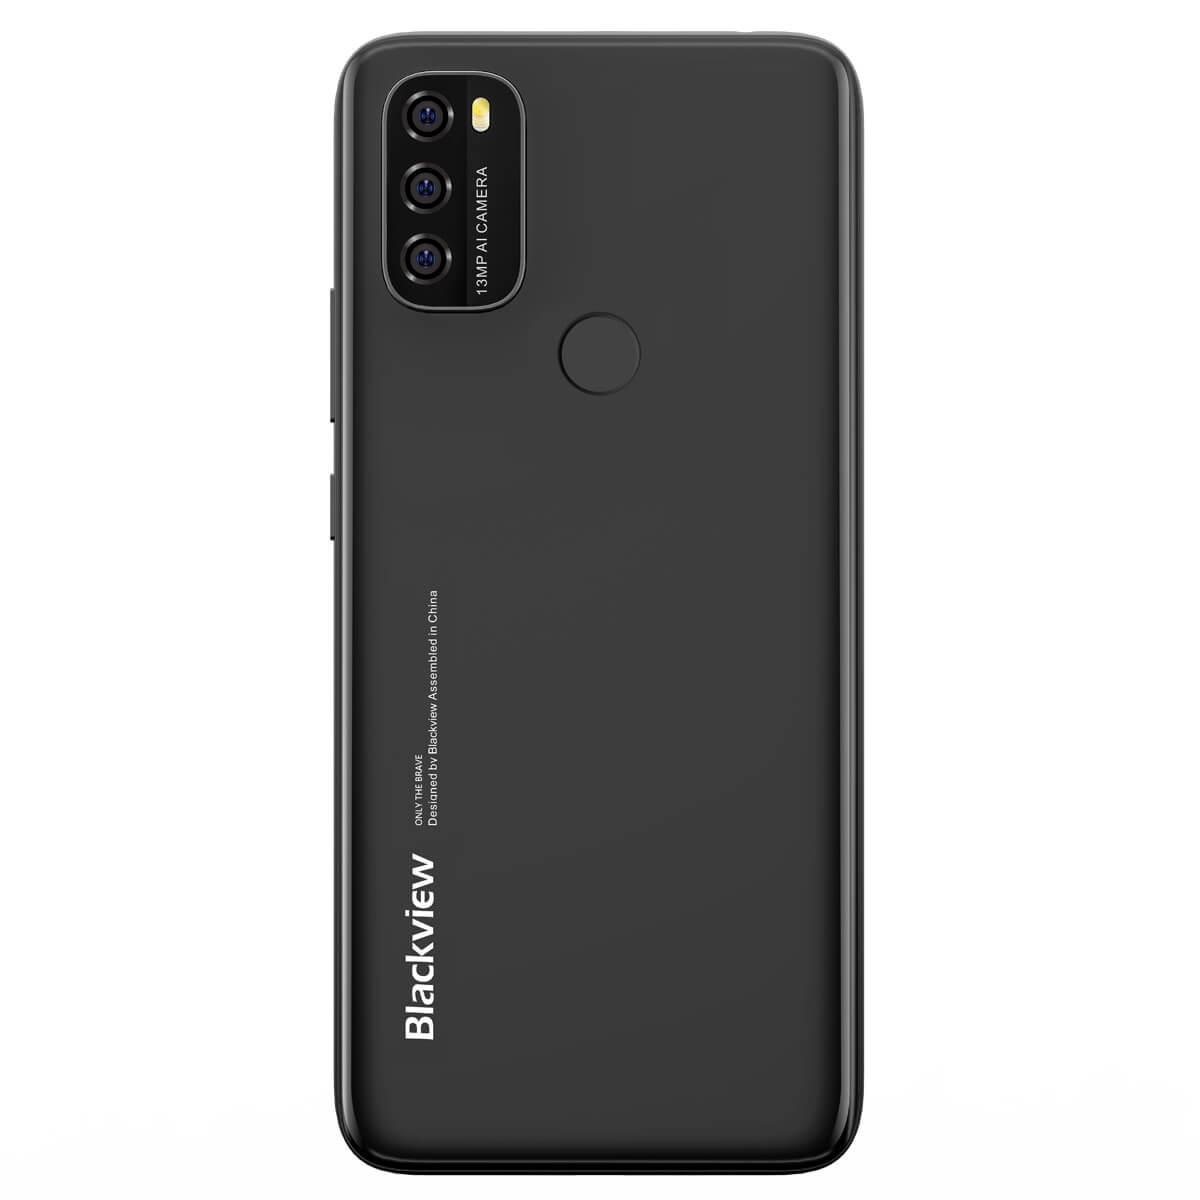 Blackview A70 Pro 4GB+32GB Android 11 Support fingerprint face unlock